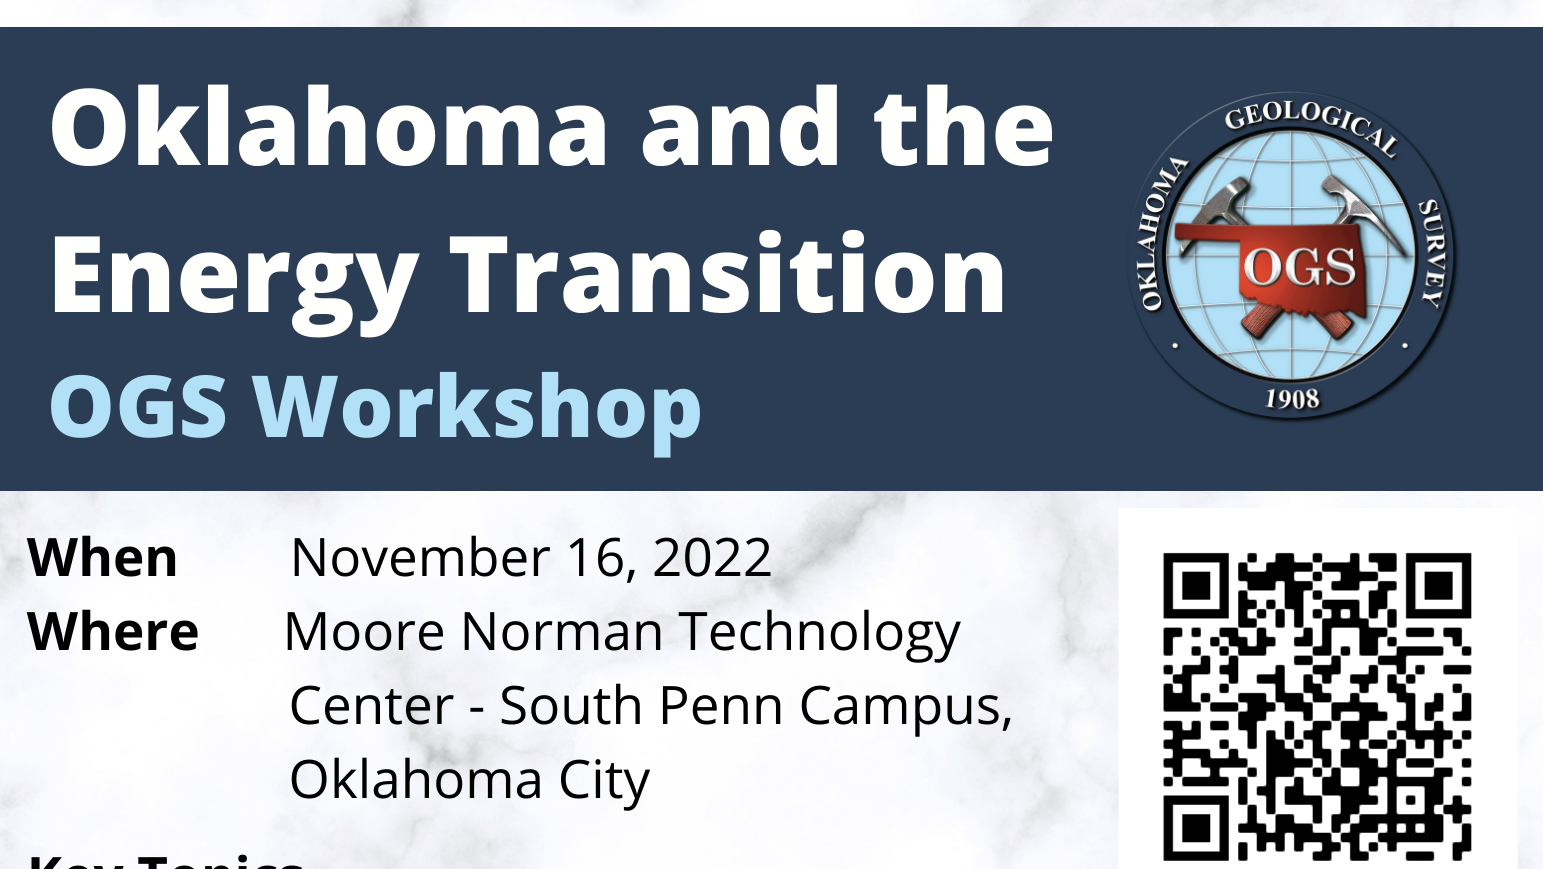 Oklahoma and the Energy Transition Workshop 2022